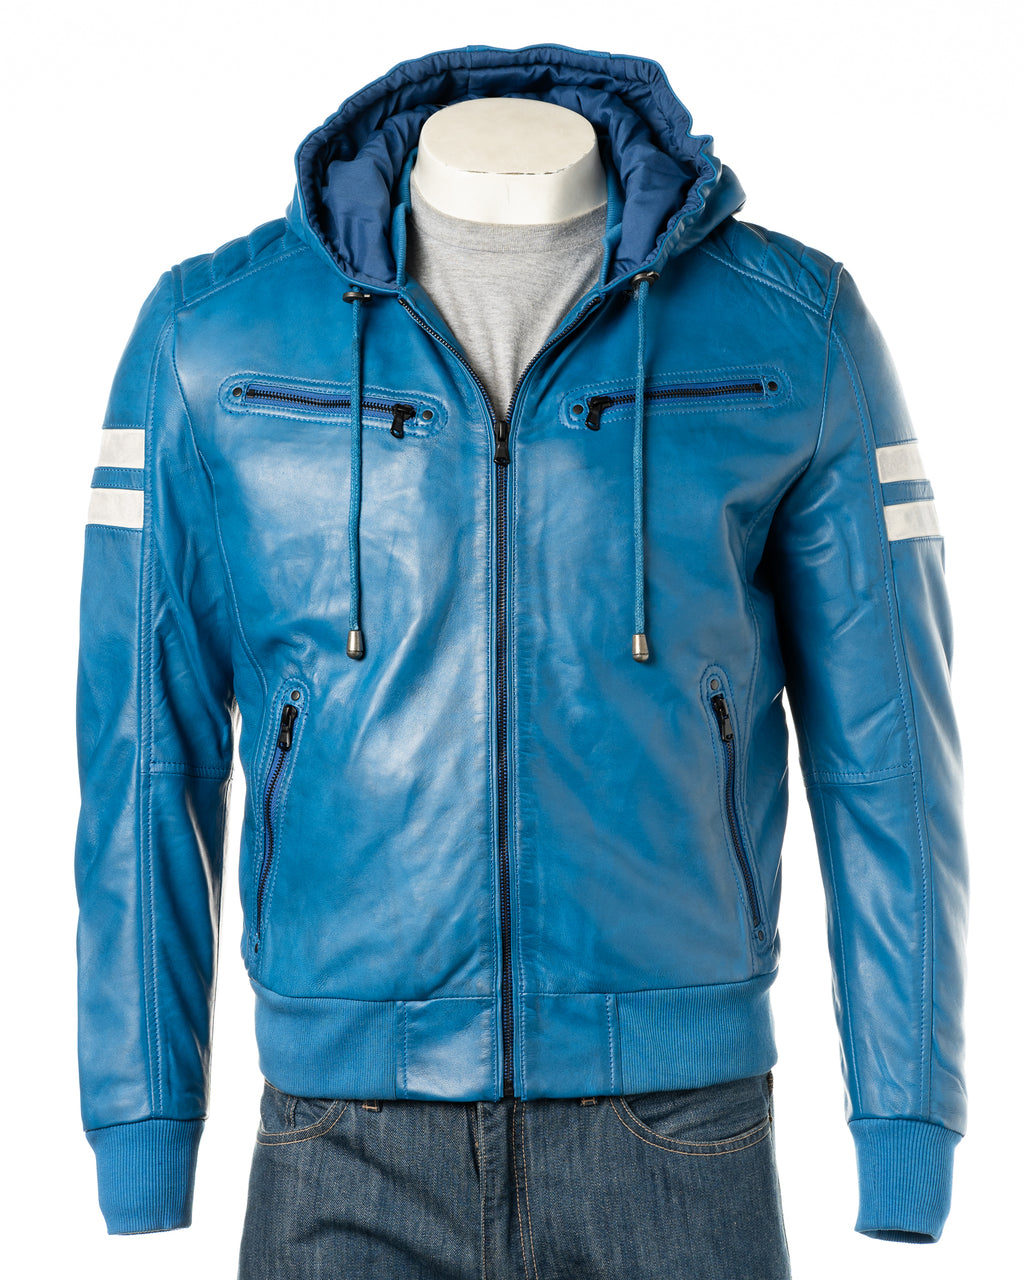 Men's Blue Hooded Contrast Panelled Racer Style Leather Jacket: Rolando